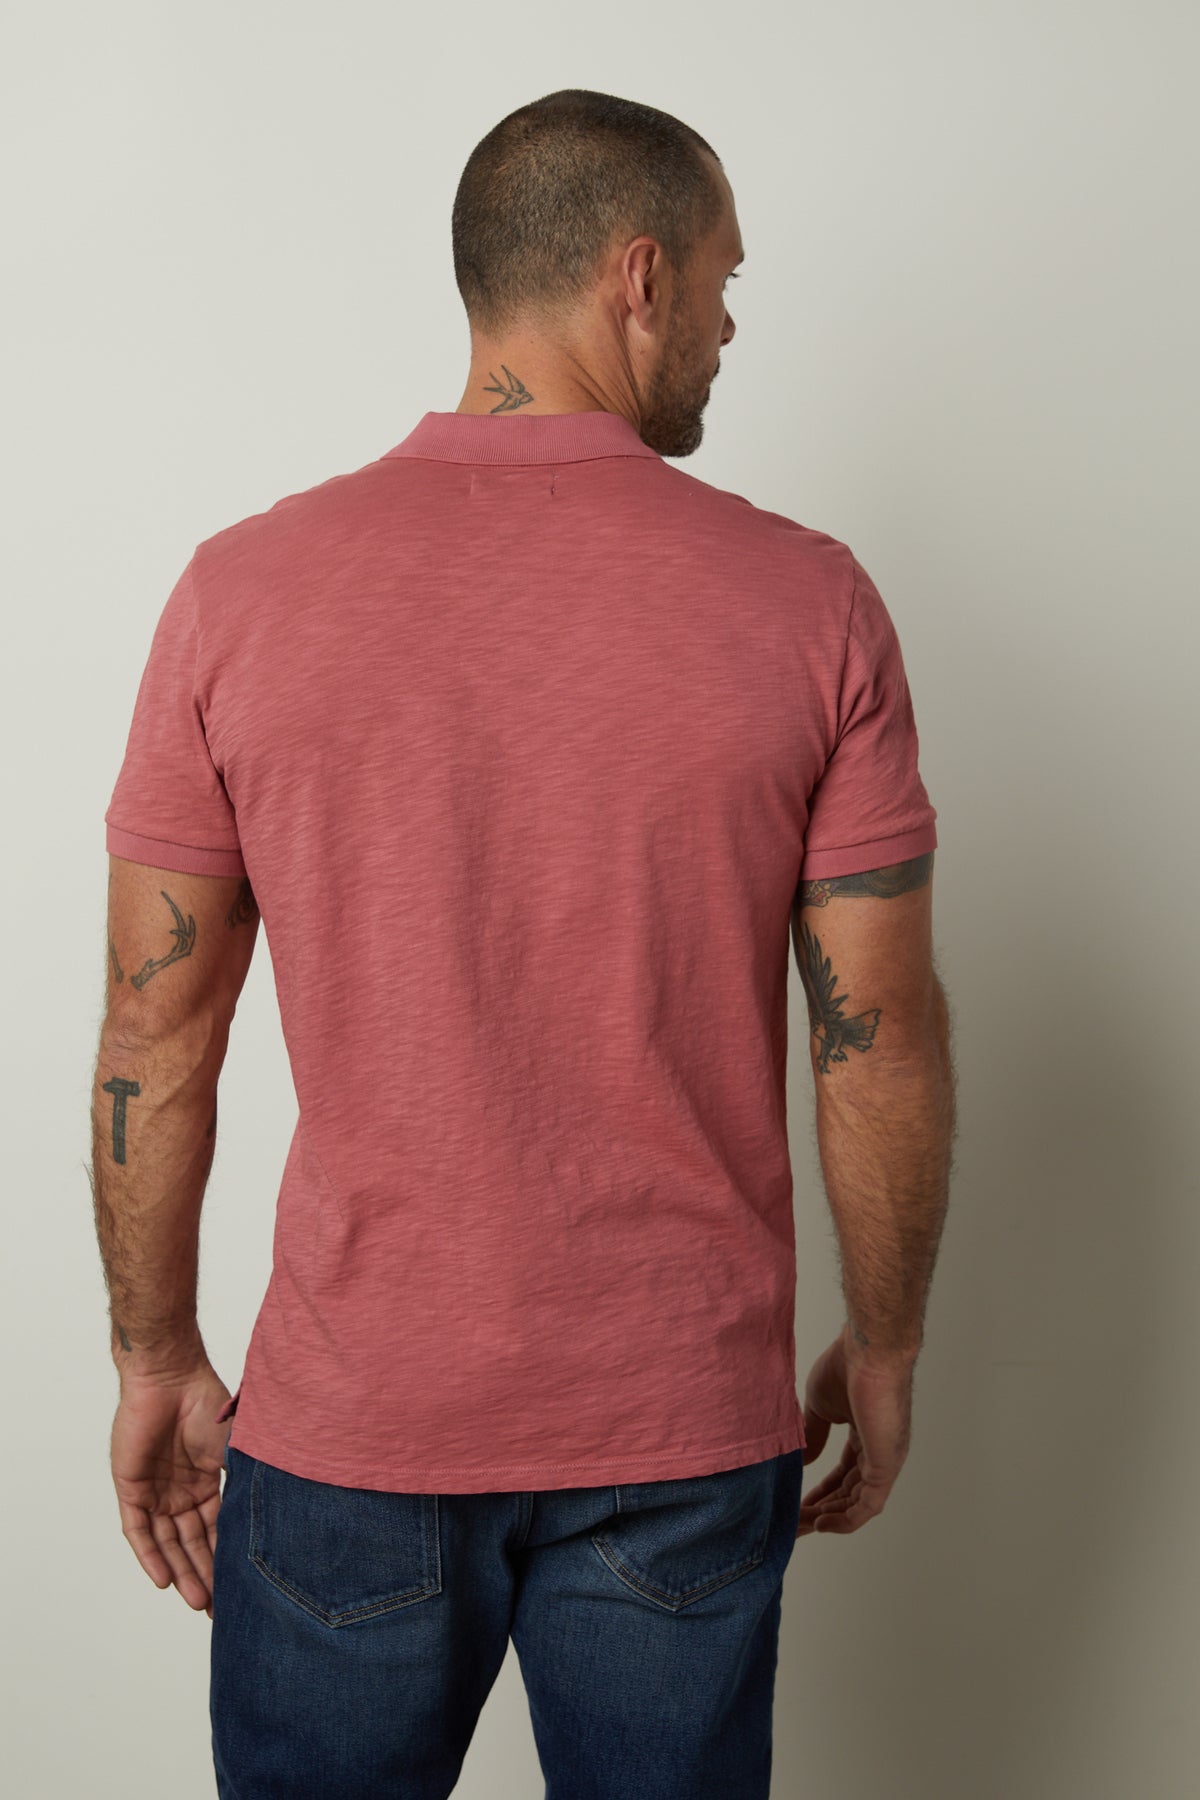 The back view of a man wearing a NIKO POLO shirt by Velvet by Graham & Spencer.-35783017660609